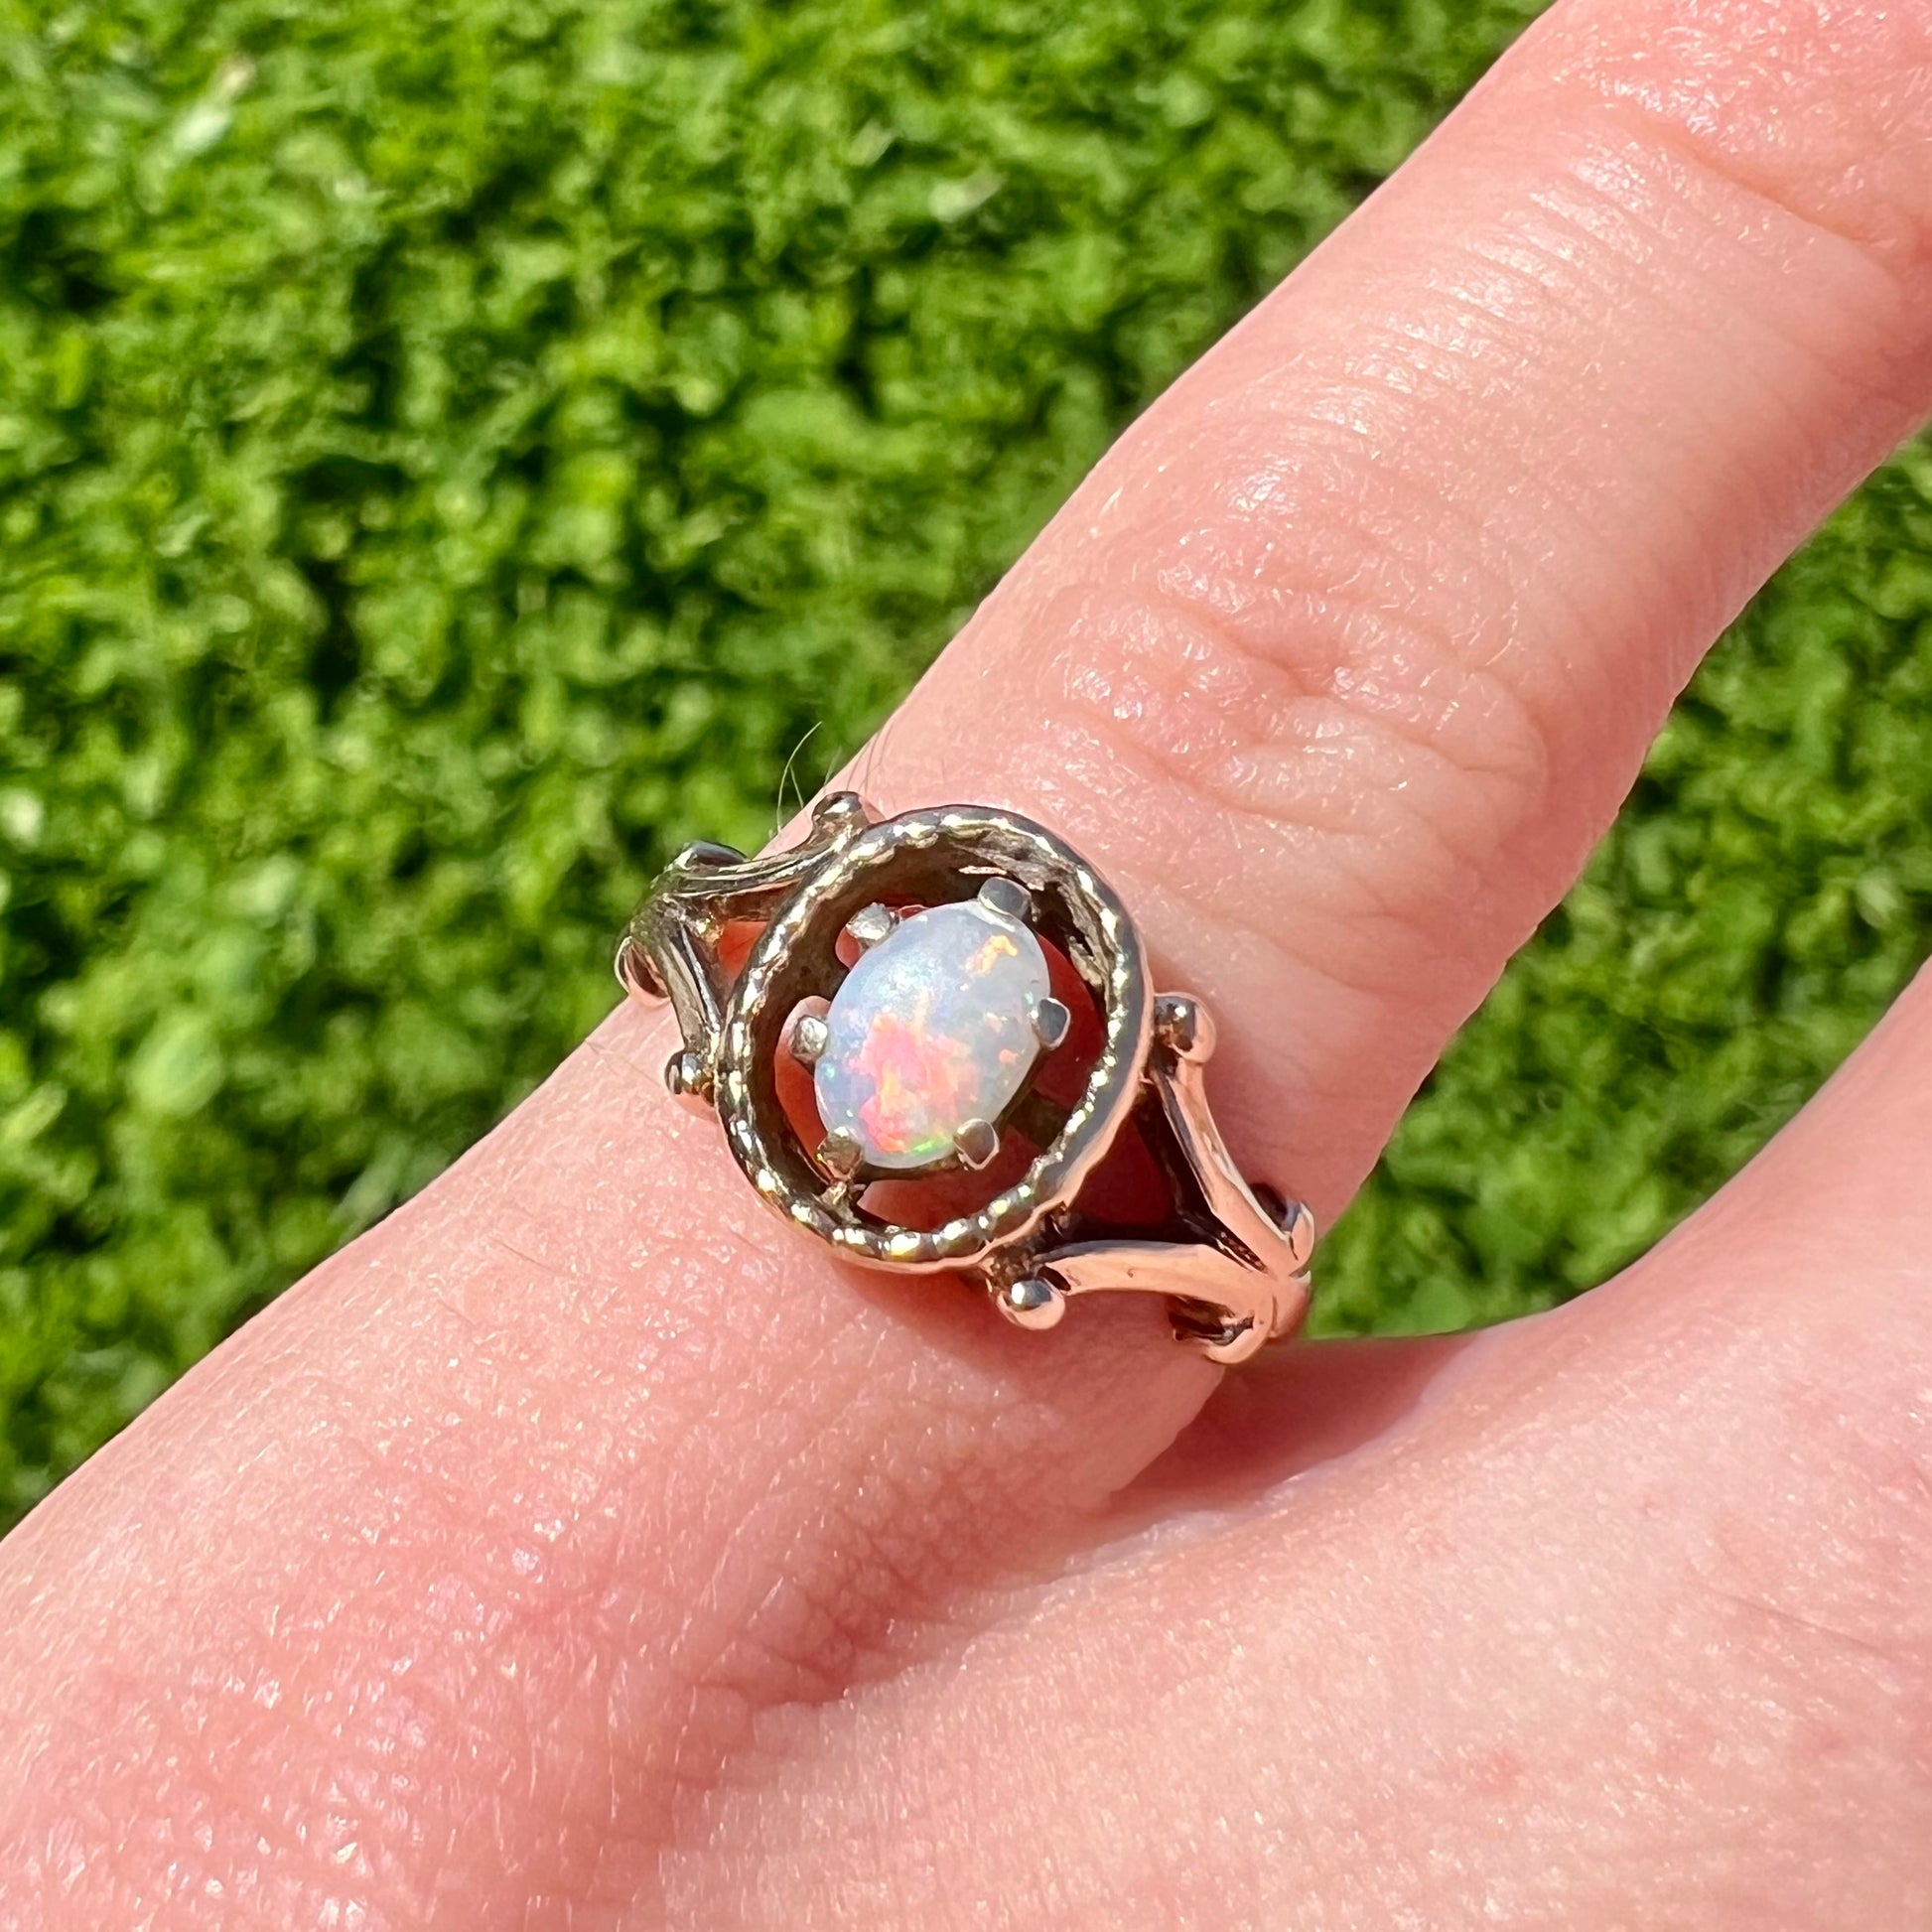 A ladies' yellow gold opal ring.  The ring has a filigree Art Nouveau style.